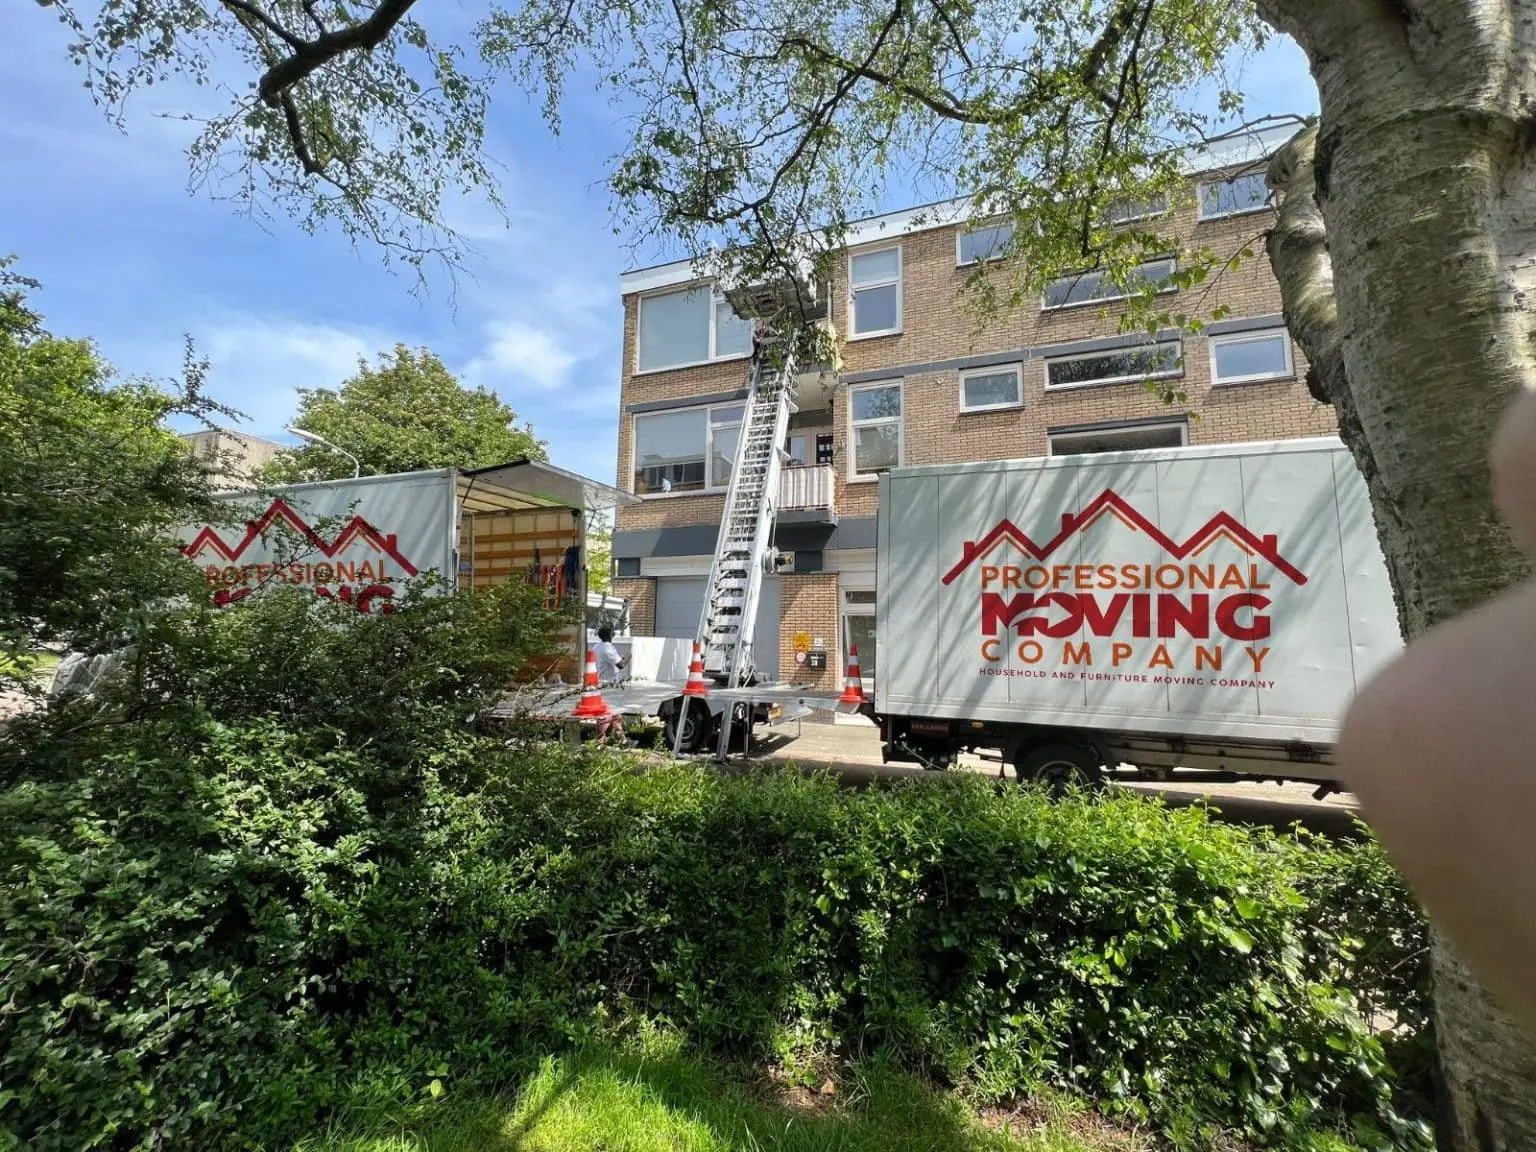 Serviced Locations Across the Netherlands | Moving Company Krimpen aan den Ijssel | Moving Company Krimpen aan den Ijssel